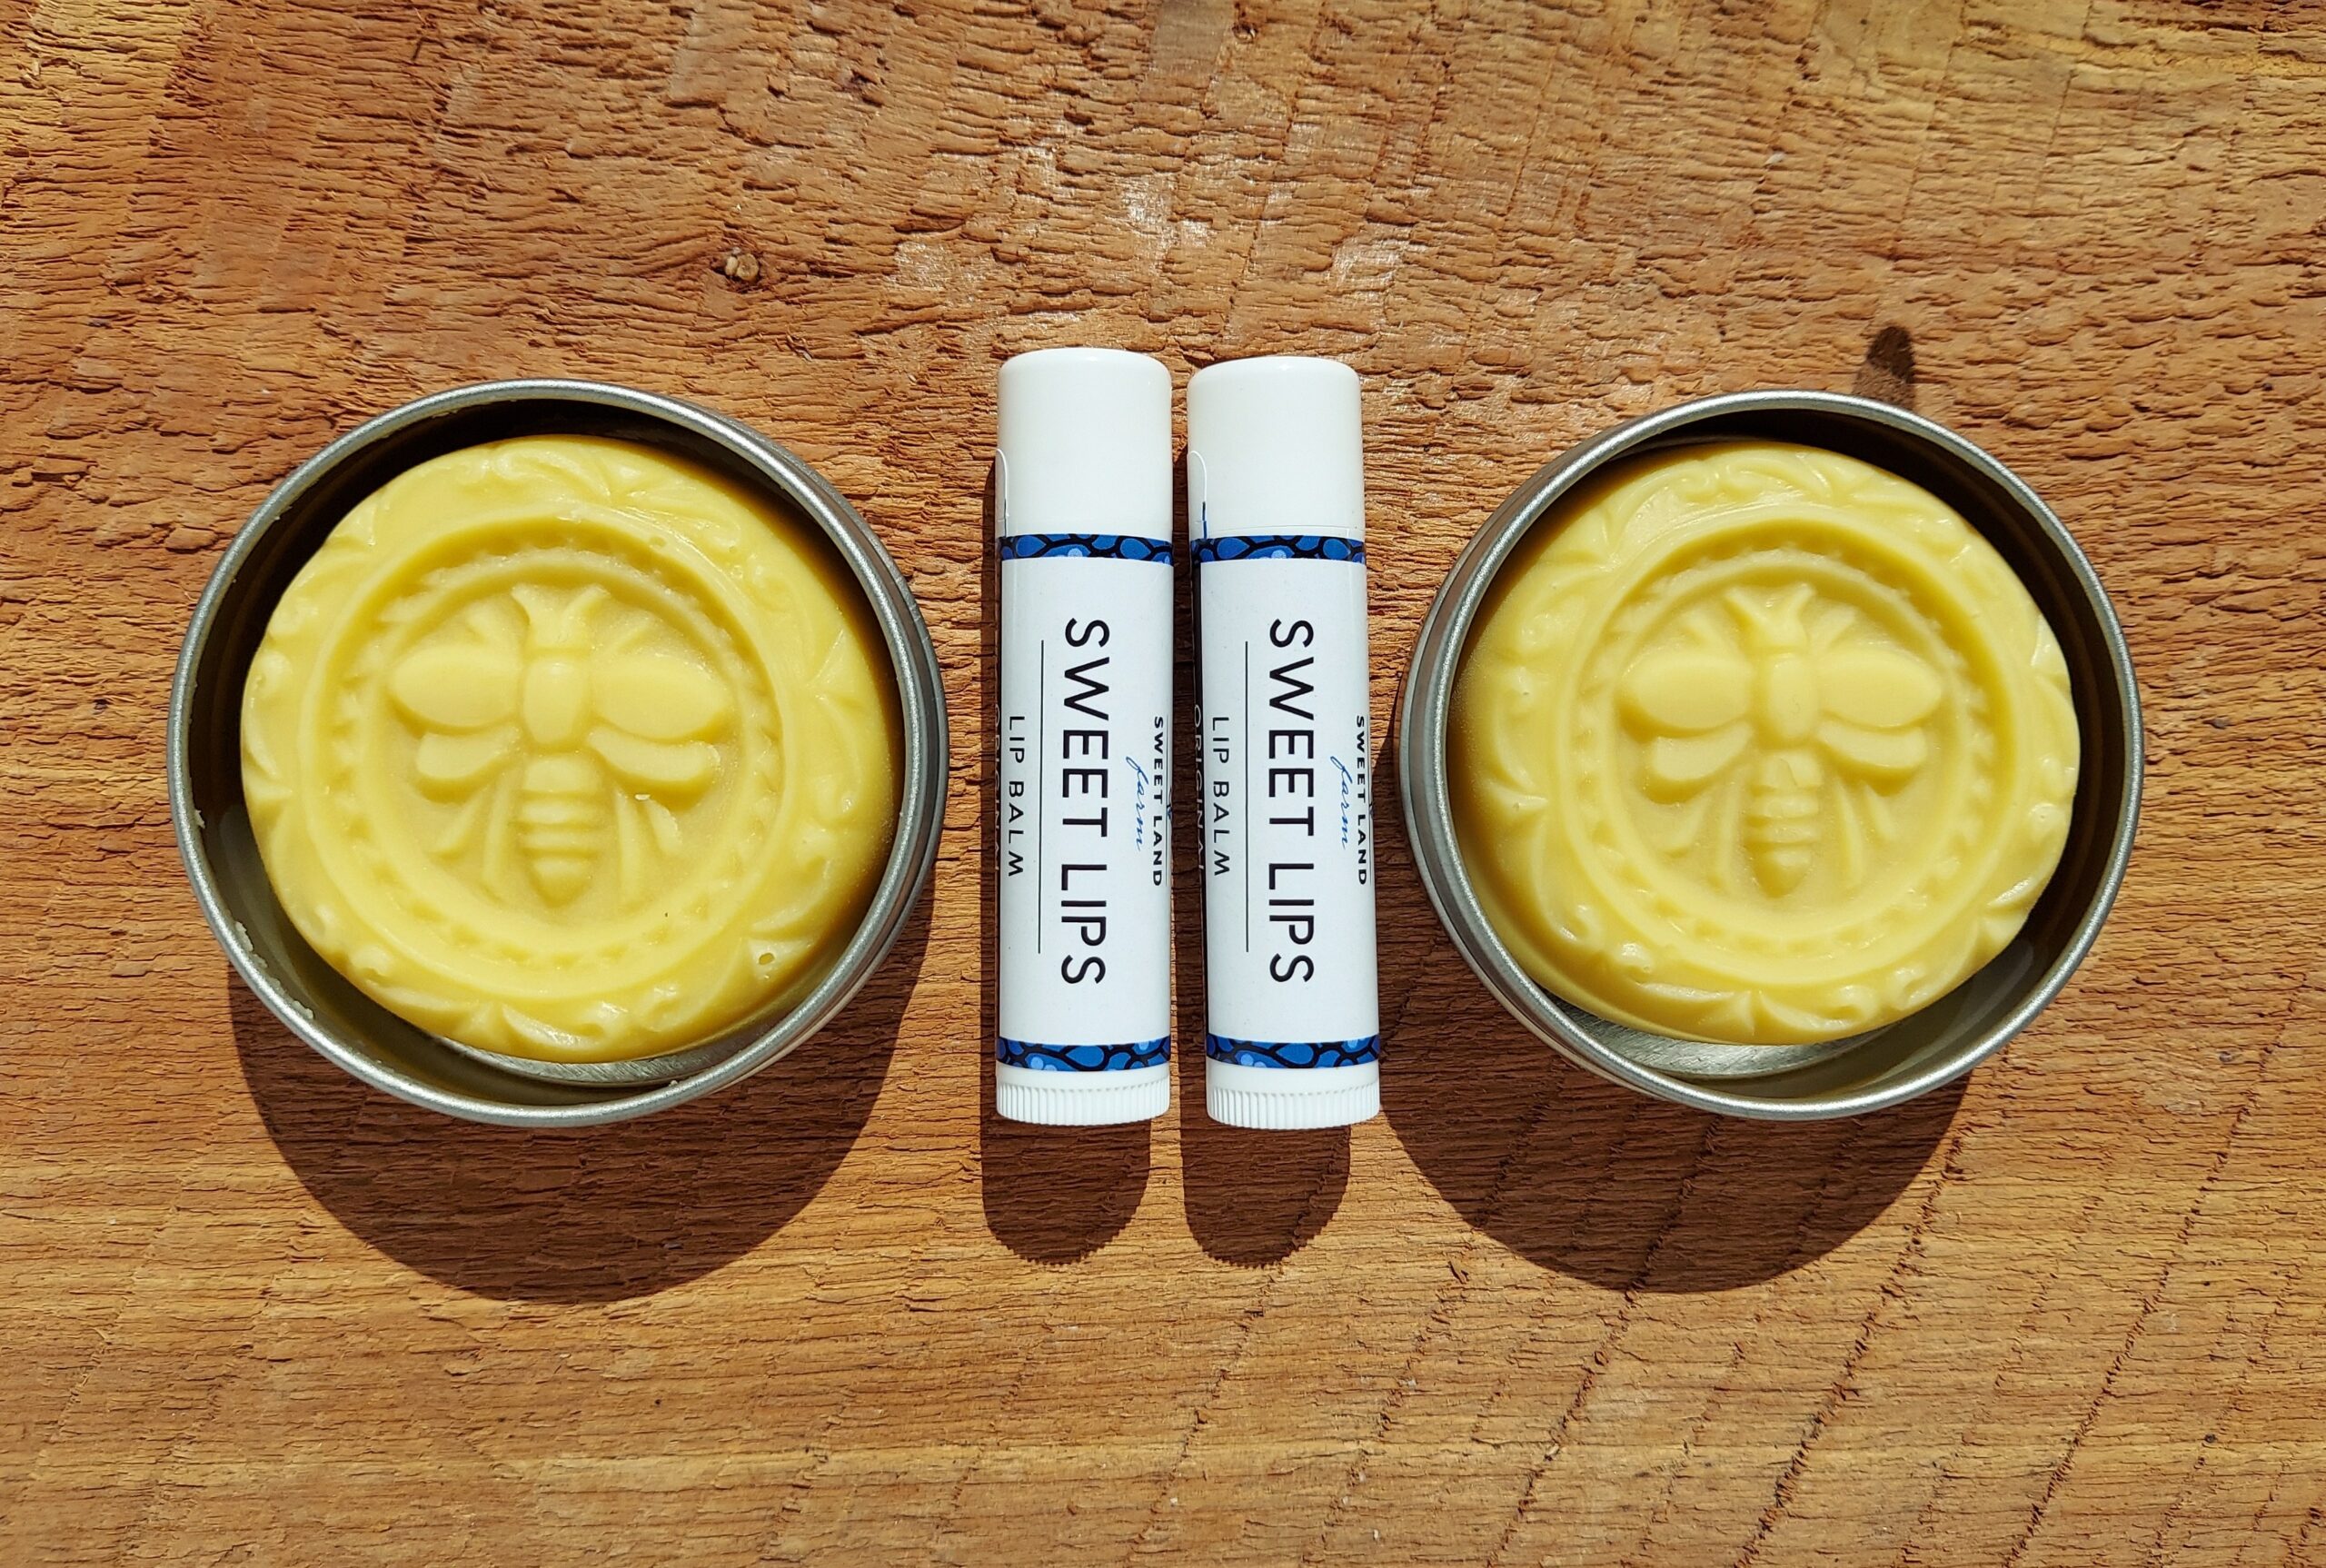 The image displays two round tins of solid lotion bars with bee imprints, placed on a wooden surface. Between the tins are two tubes of lip balm labeled "SWEET LIPS." The items are arranged symmetrically in bright sunlight, reminiscent of enjoying a perfect morning coffee in Duluth.